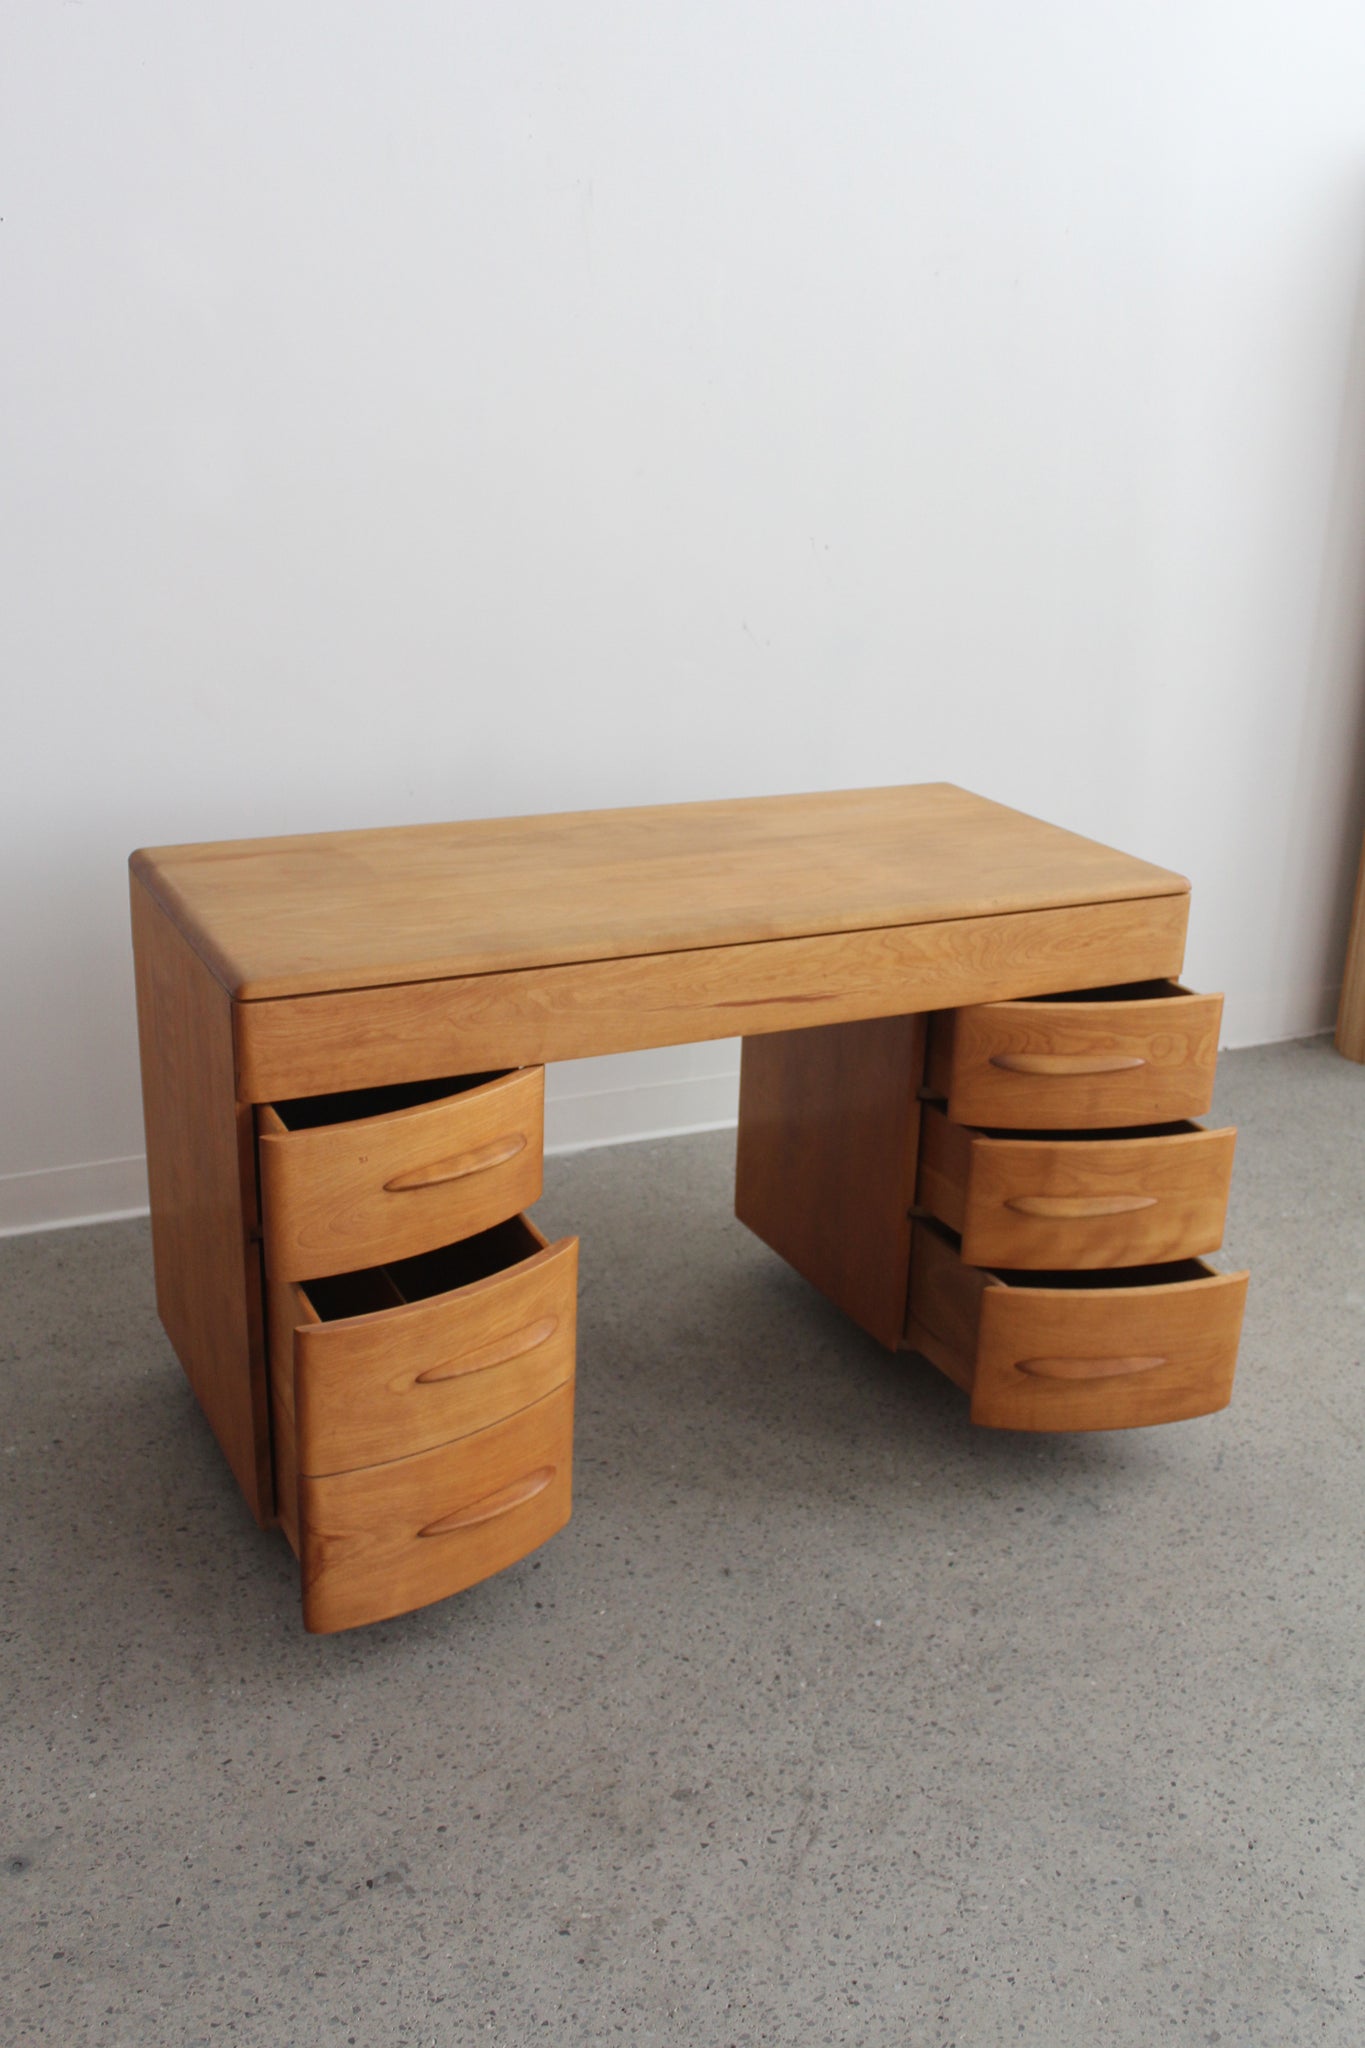 Kneehole Desk by Count Alexis de Sakhoffsky for Heywood Wakefield